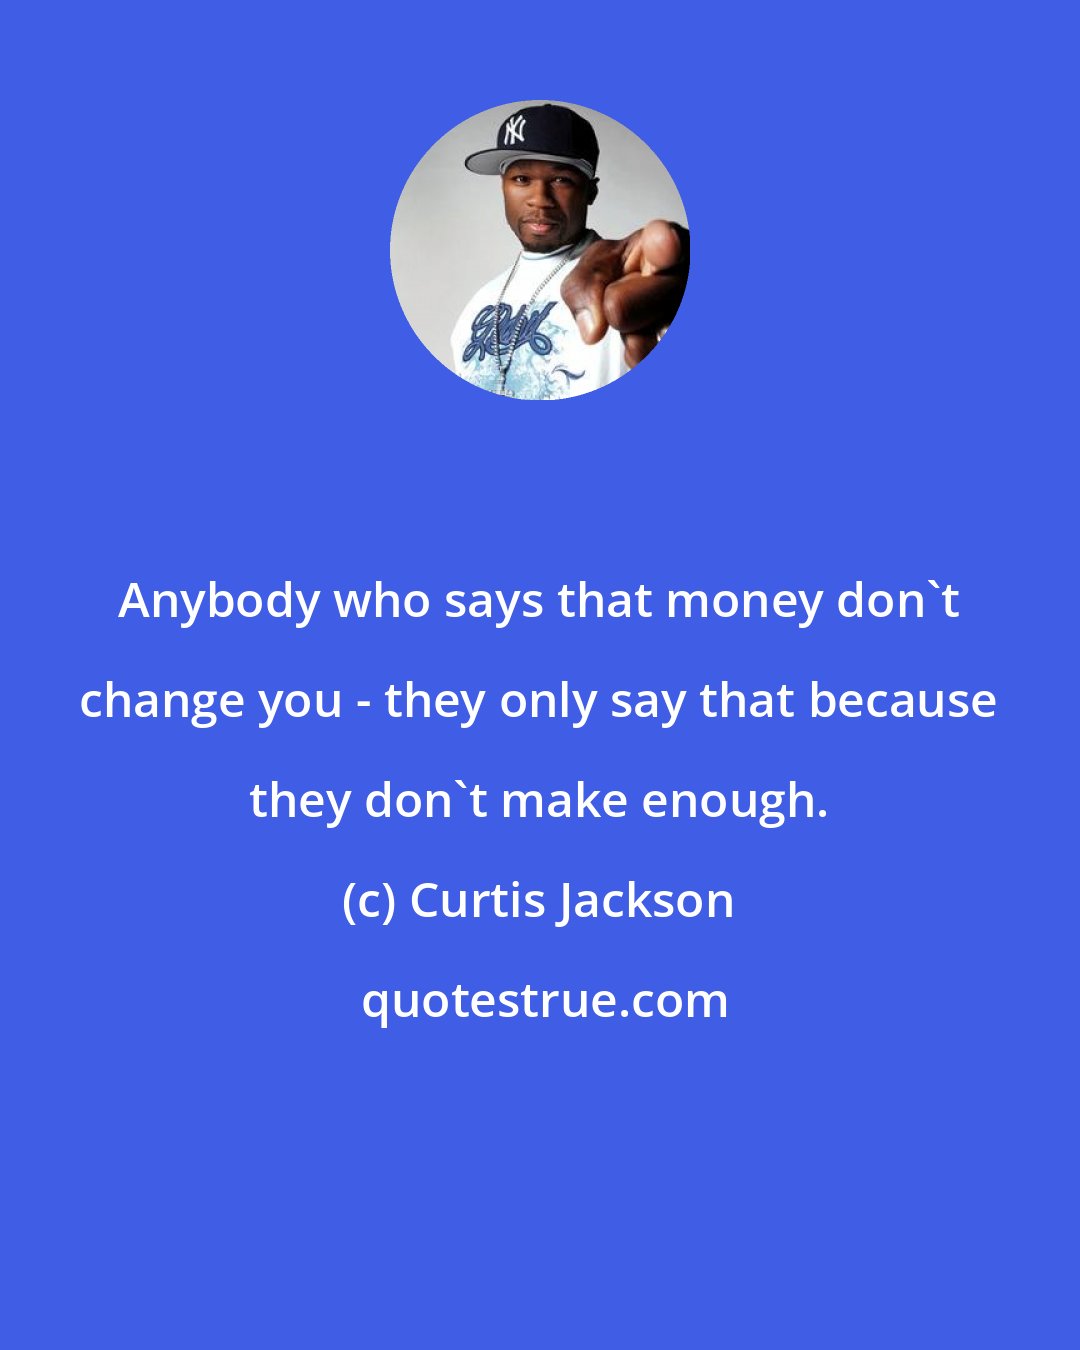 Curtis Jackson: Anybody who says that money don't change you - they only say that because they don't make enough.